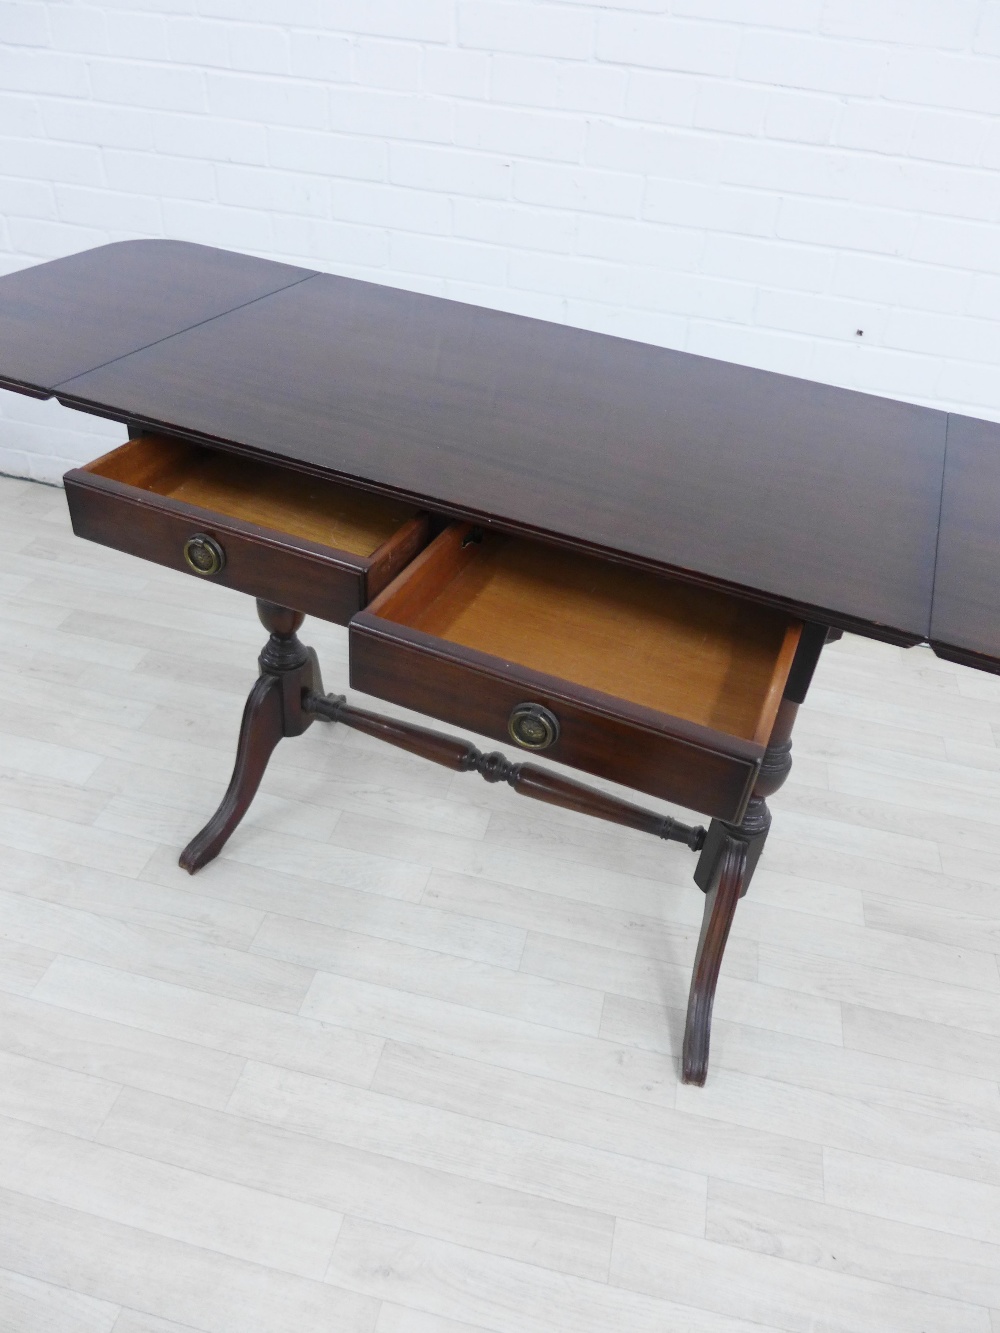 Reproduction sofa table of traditional form, 74 x 85cm - Image 3 of 3